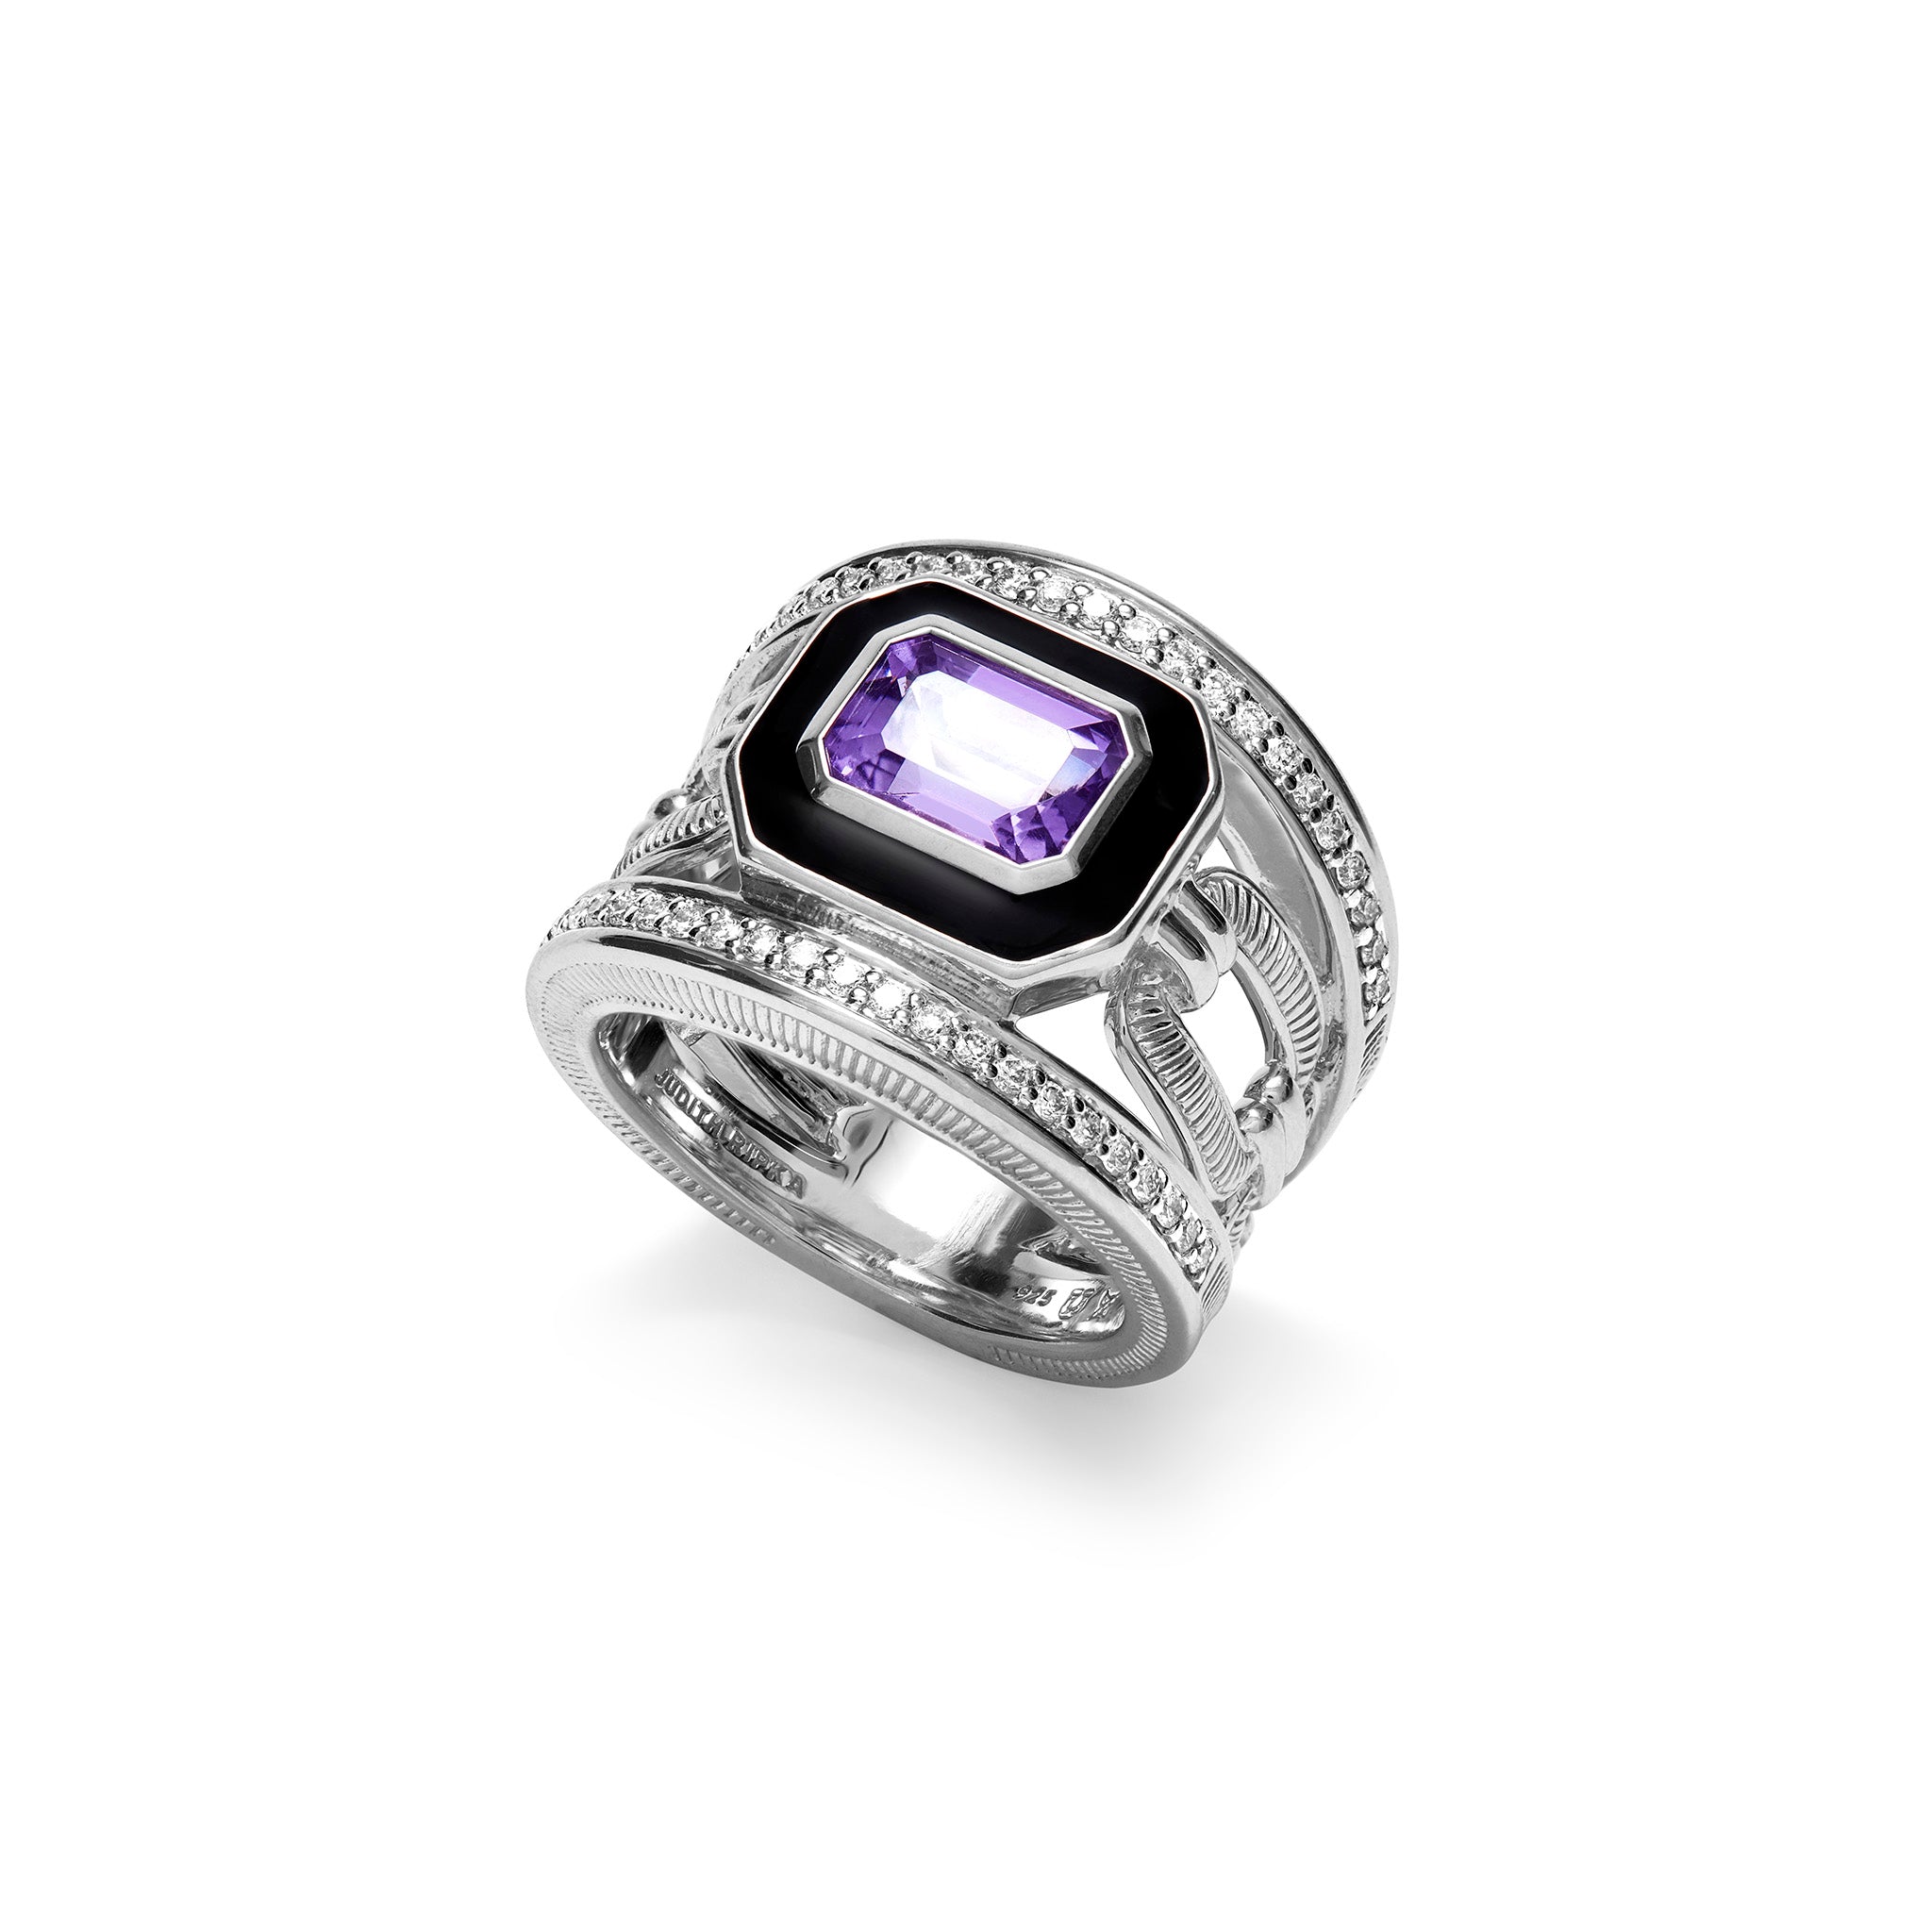 Adrienne Band Ring with Enamel, Amethyst and Diamonds